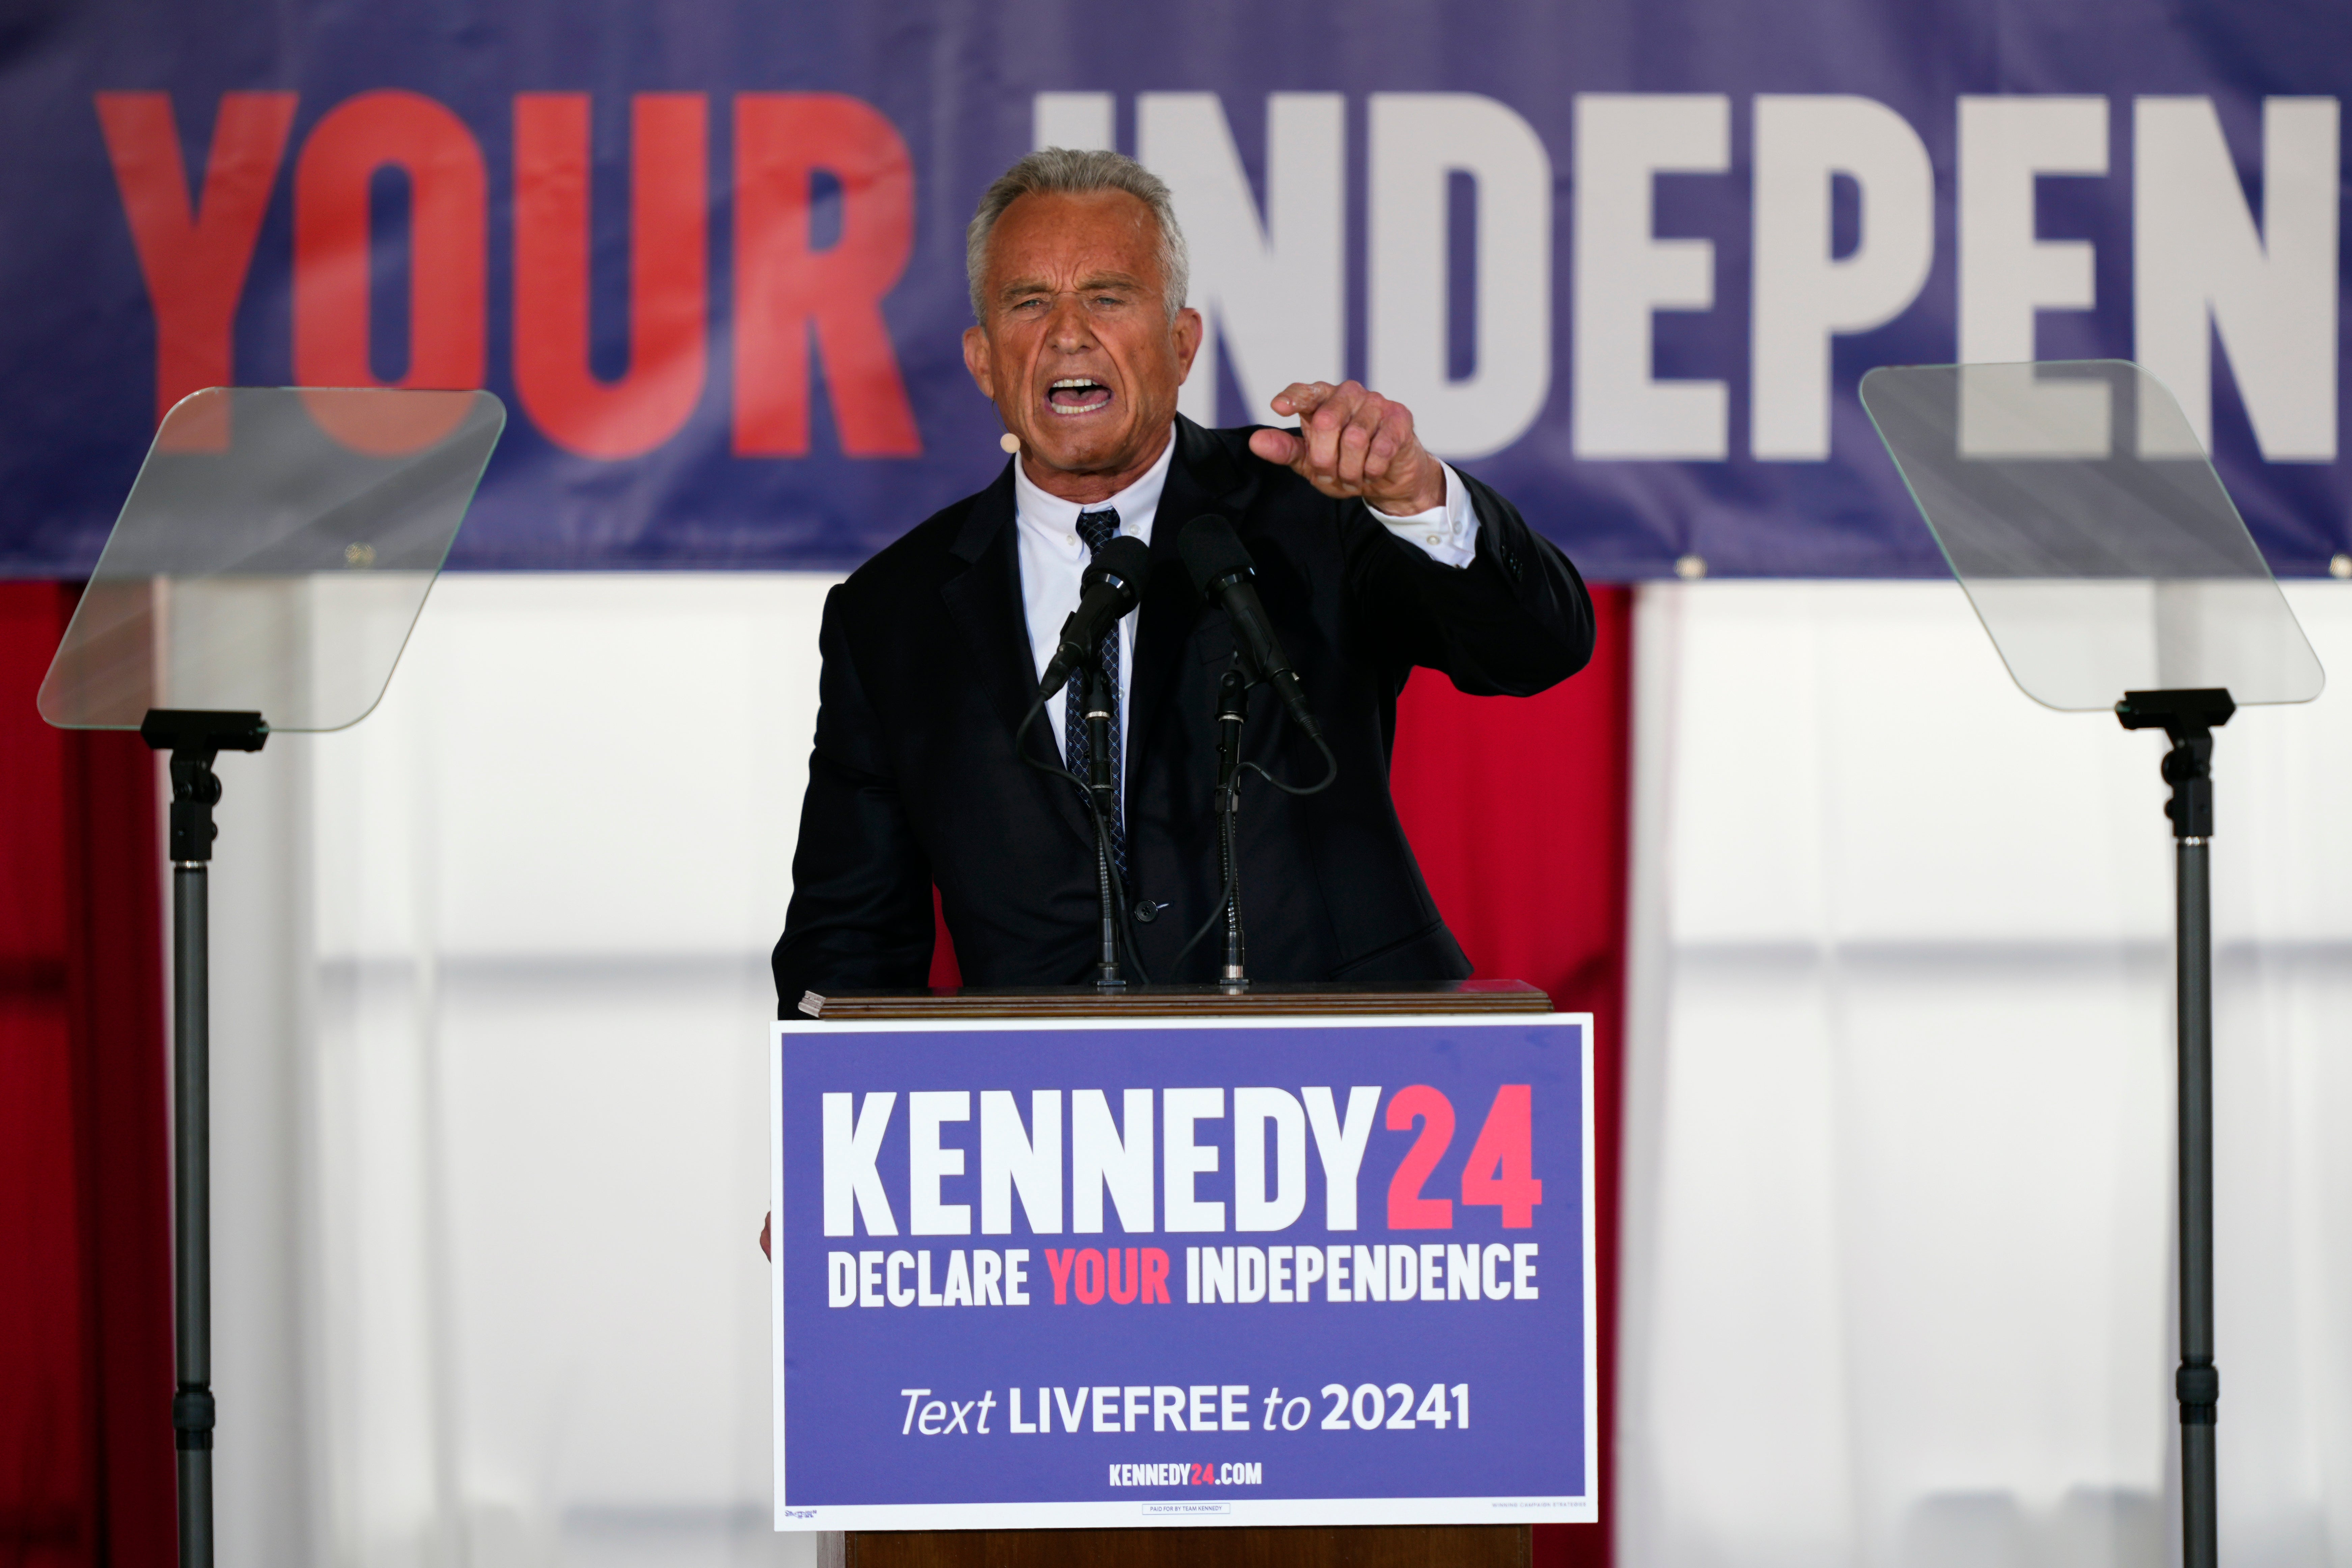 Presidential candidate Robert F Kennedy, Jr. speaks during a campaign event at Independence Mall, on 9 October